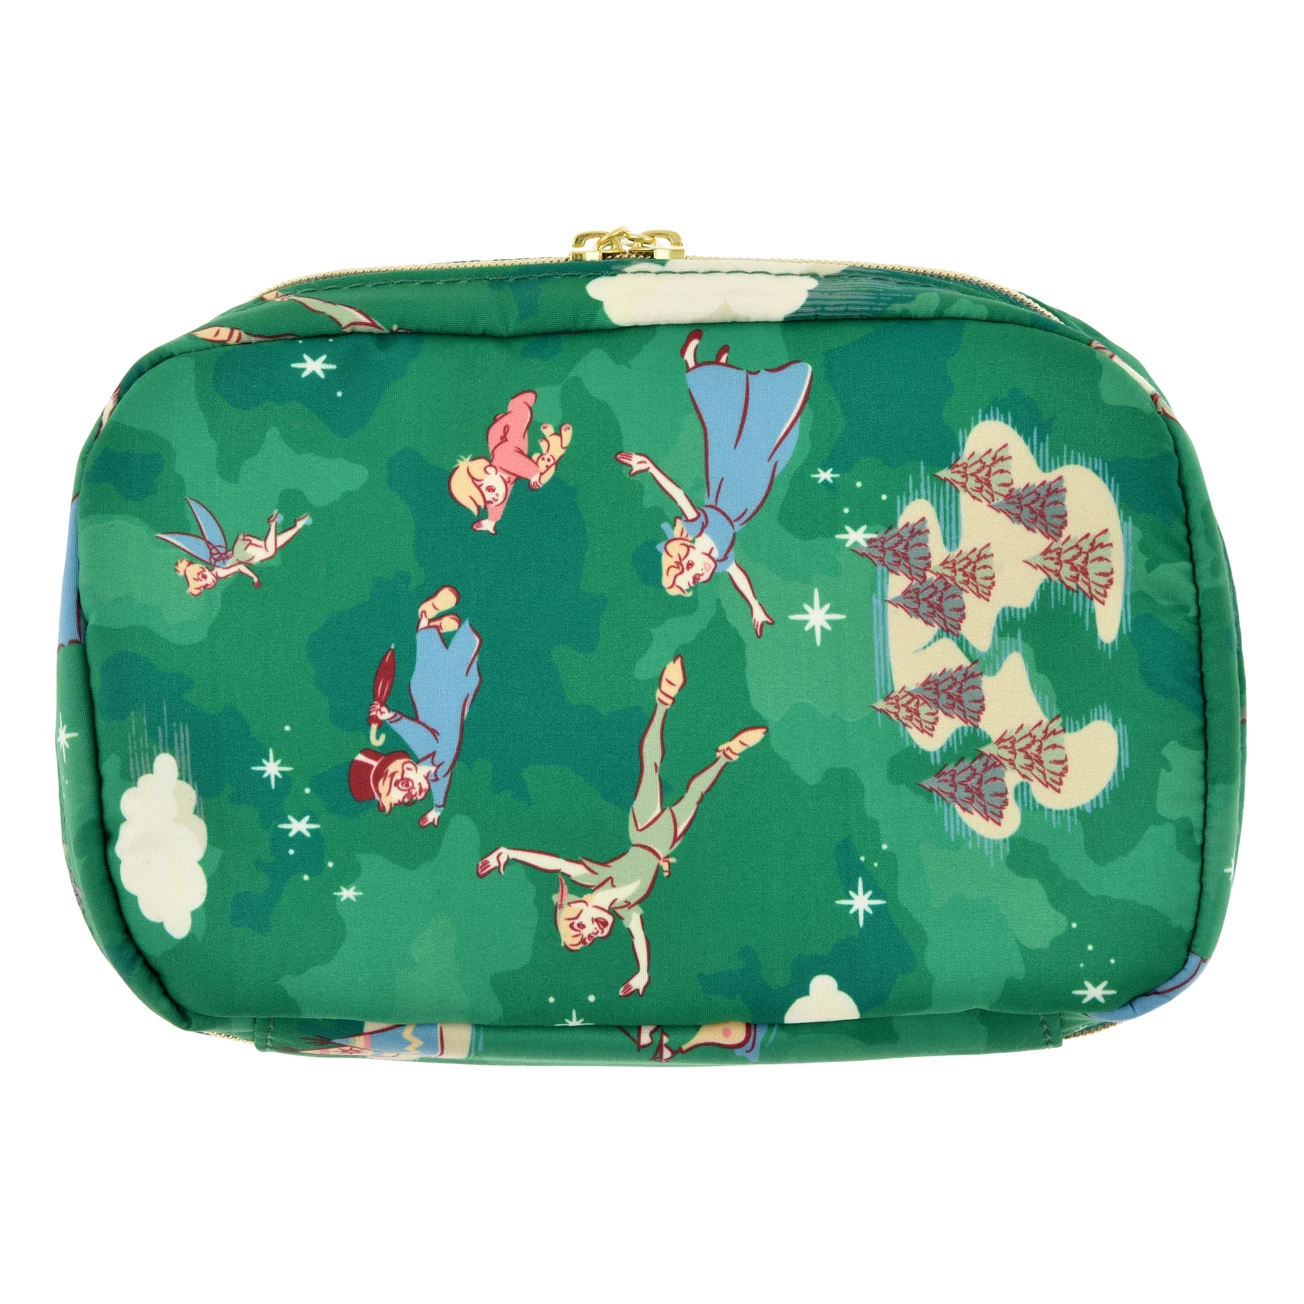 SDJ - Take me to wonderland Collection - Pouch